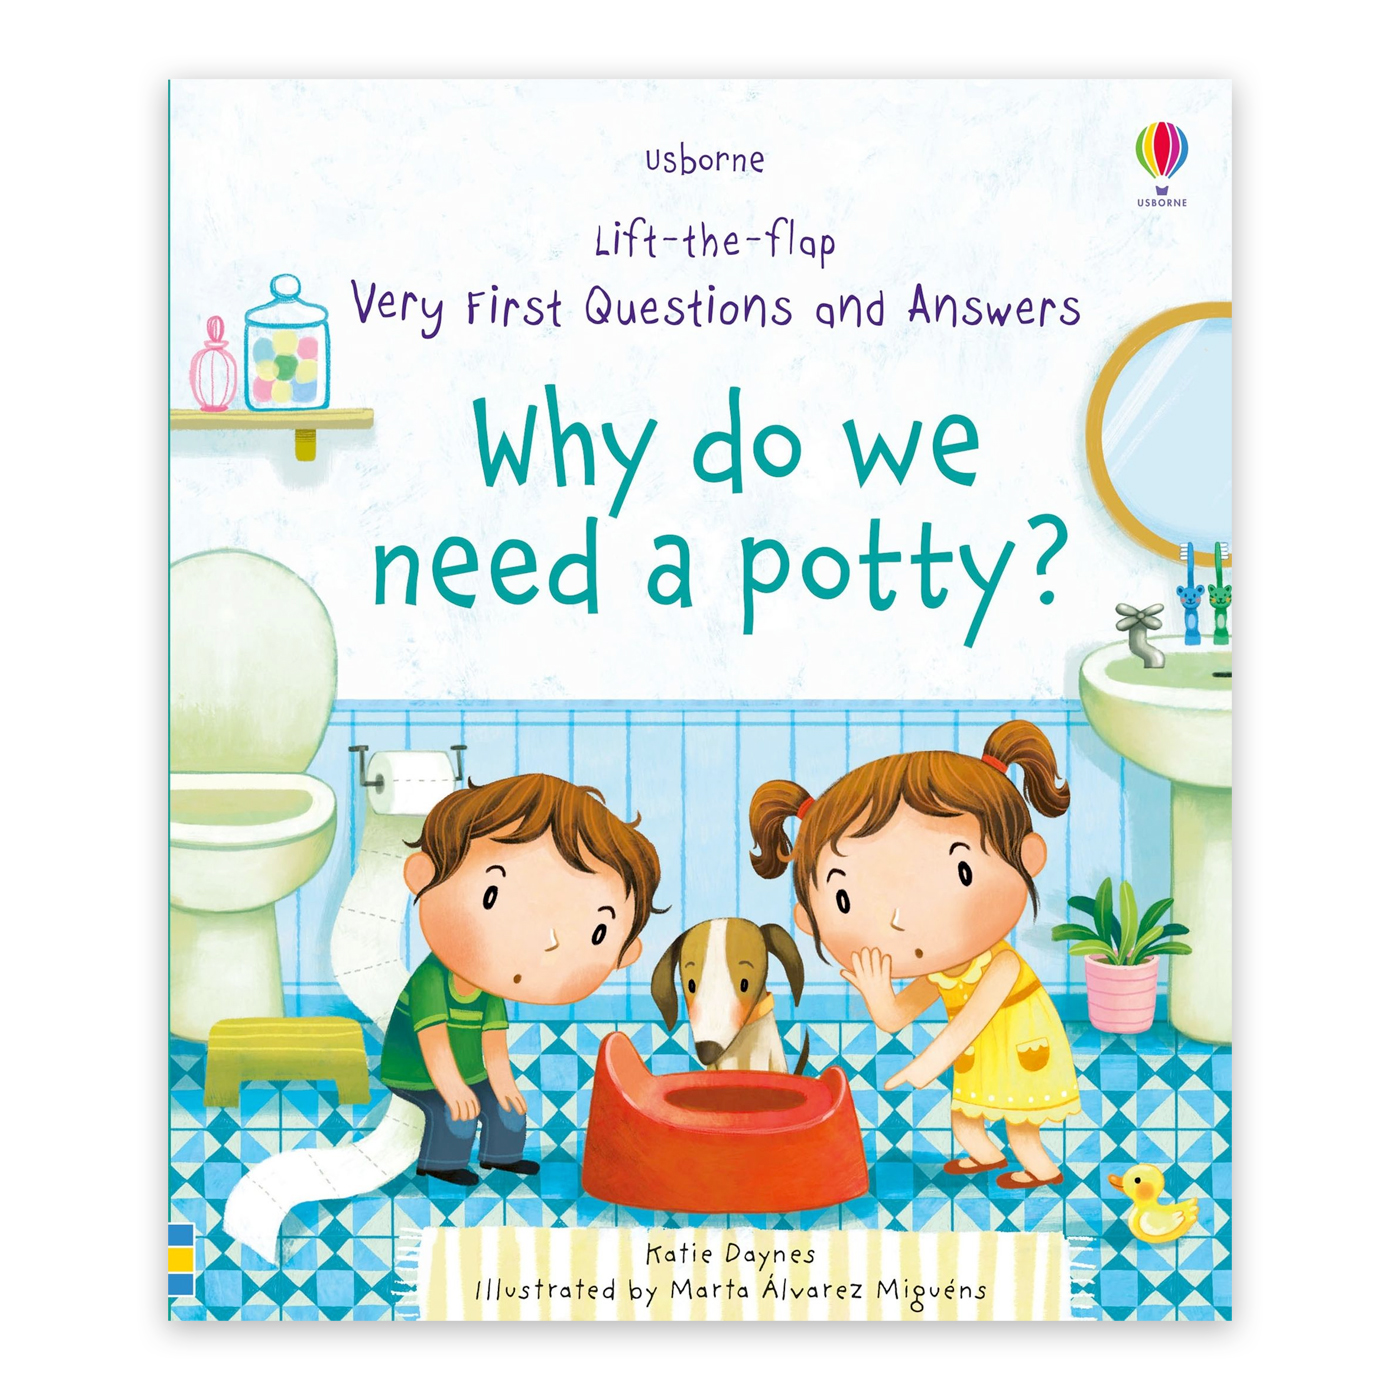  Very First Questions and Answers Why do we need a potty?